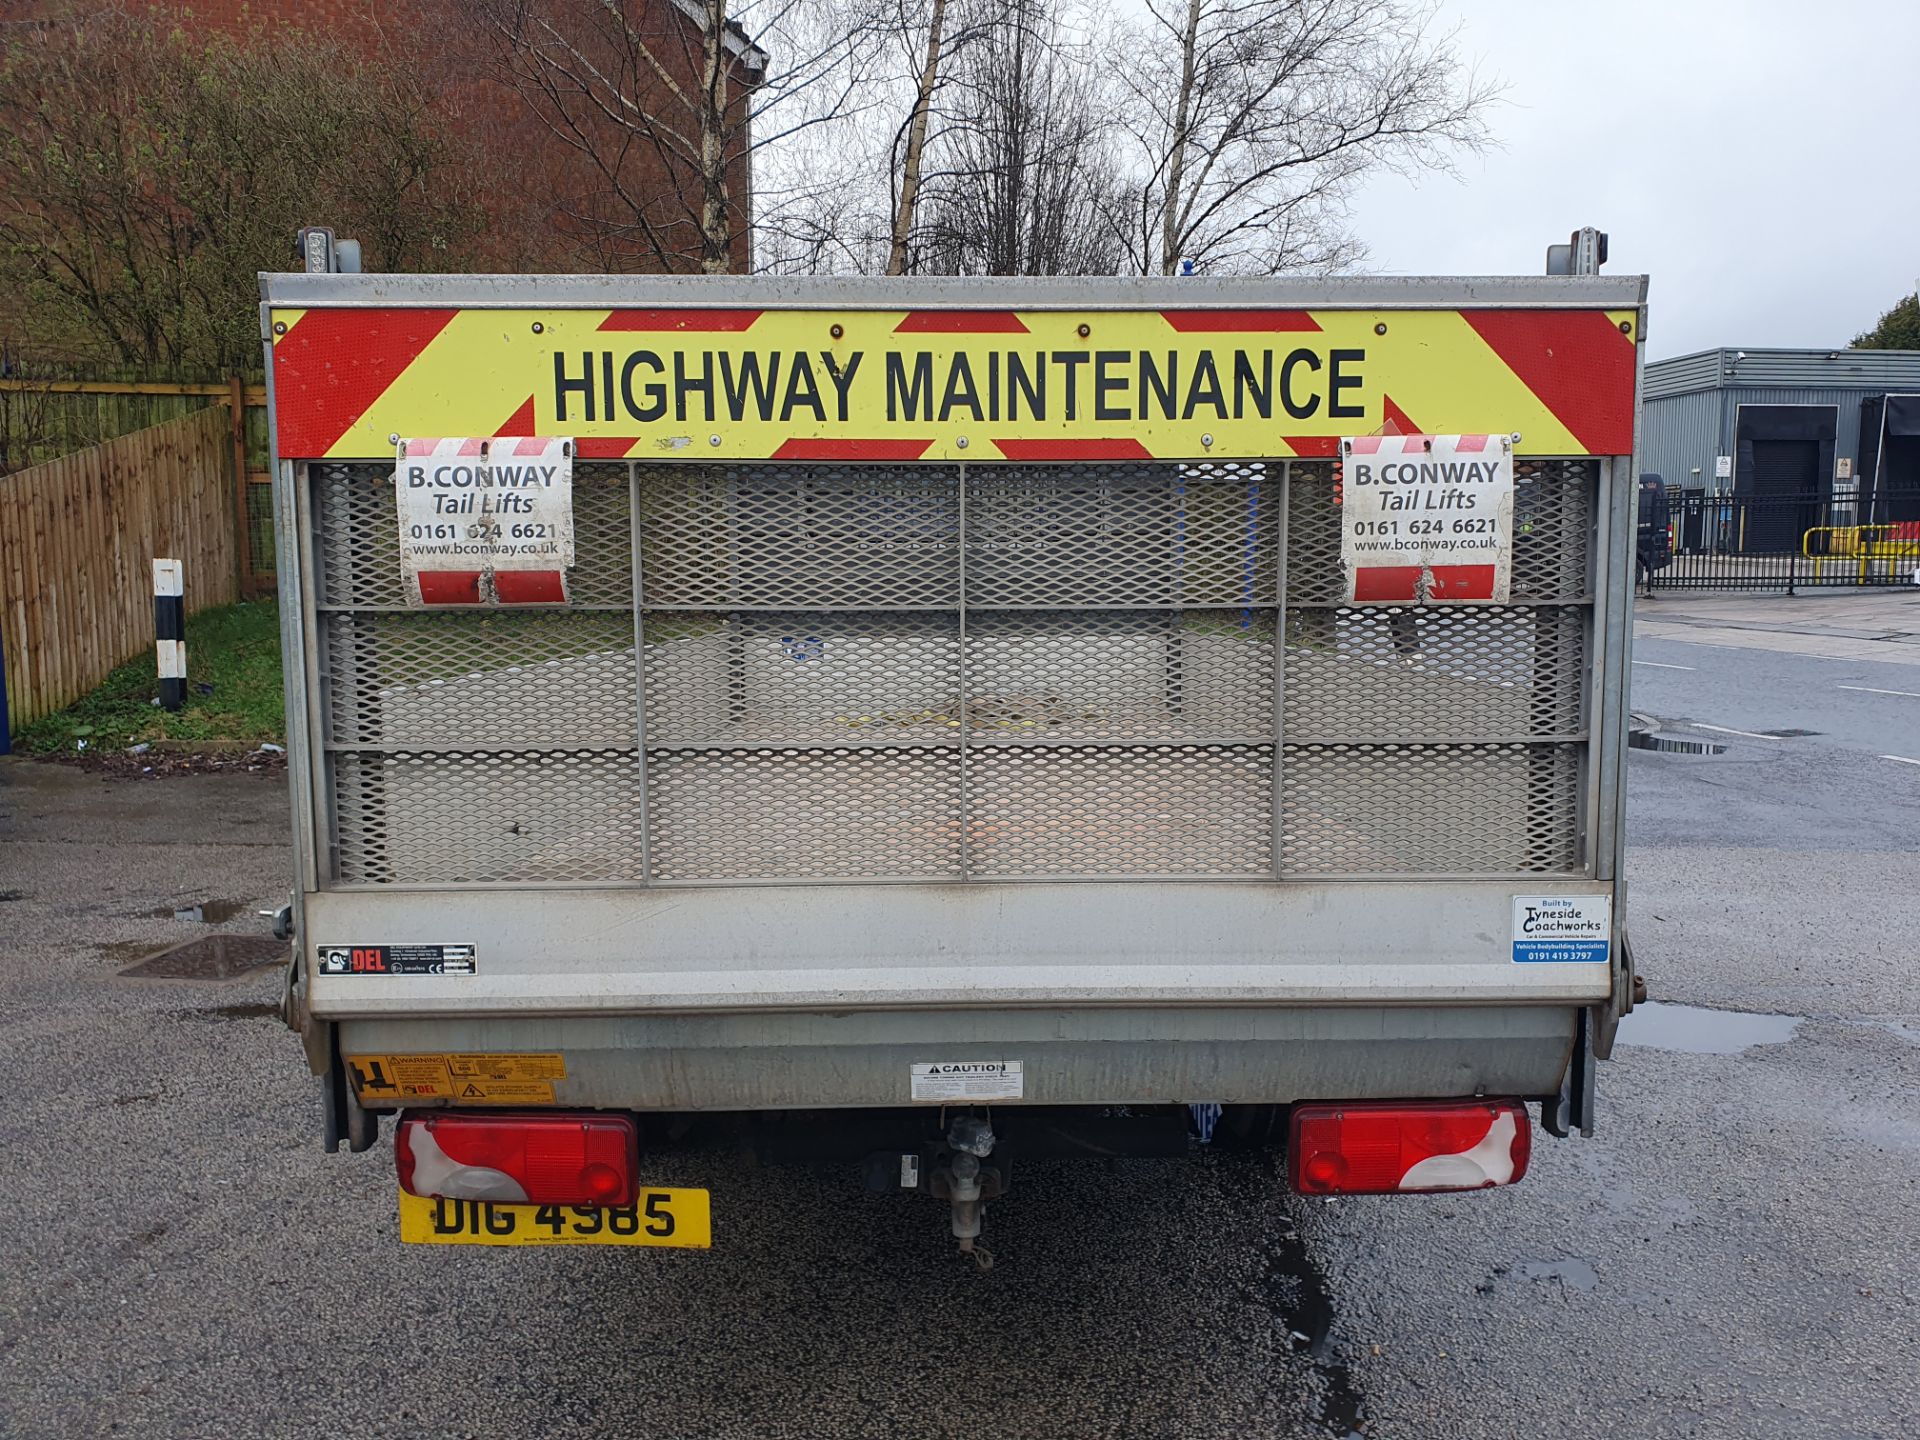 Mercedes-Benz Sprinter 314CDI Dropside Lorry w/ Tail-Lift | DIG 4985 | 102,887 Miles - Image 6 of 19